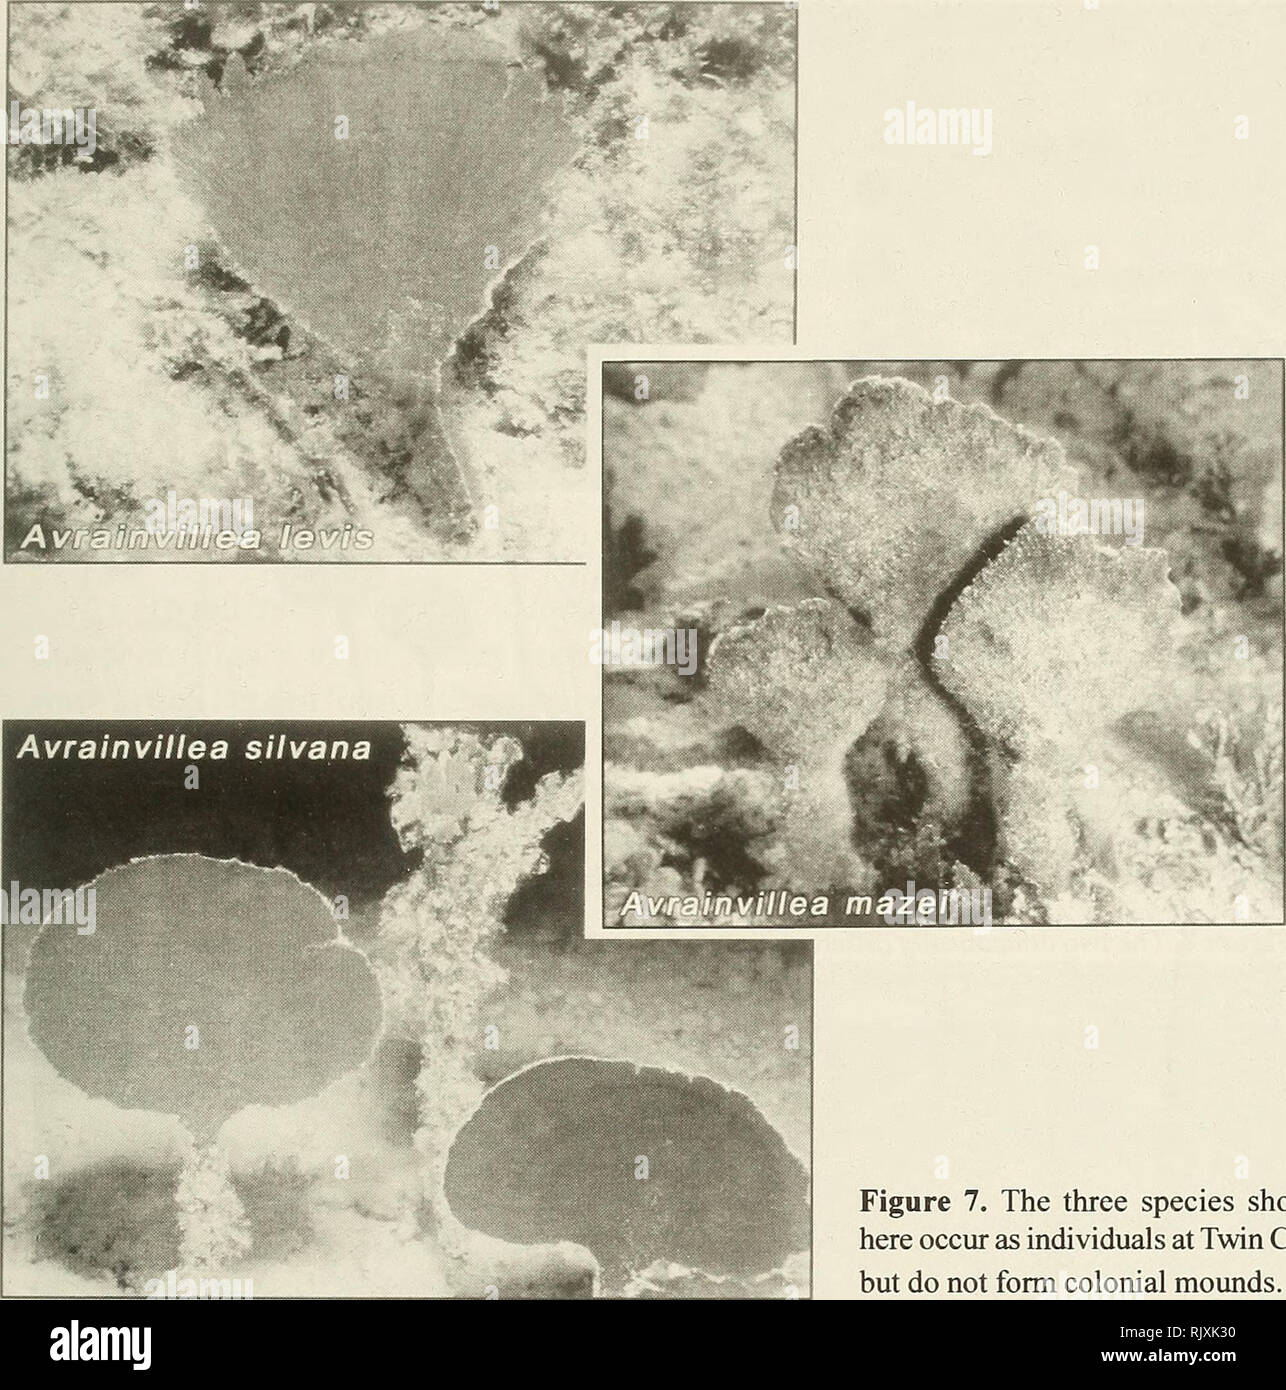 . Atoll research bulletin. Coral reefs and islands; Marine biology; Marine sciences. Figure 7. The three species shown here occur as individuals at Twin Cays but do not form colonial mounds. Although sporogenic reproduction has never been reported for Belizean Avrainvillea, rare club-shaped release structures produced at the tips of individual blade siphons have been observed elsewhere (Littler and Littler, 1992). Unlike other Bryopsidales, species of Avrainvillea are long-lived (see Littler and Littler, 1992) and do not undergo holocarpy [i.e., mass synchronous sporogenesis (Clifton, 1997) fo Stock Photo